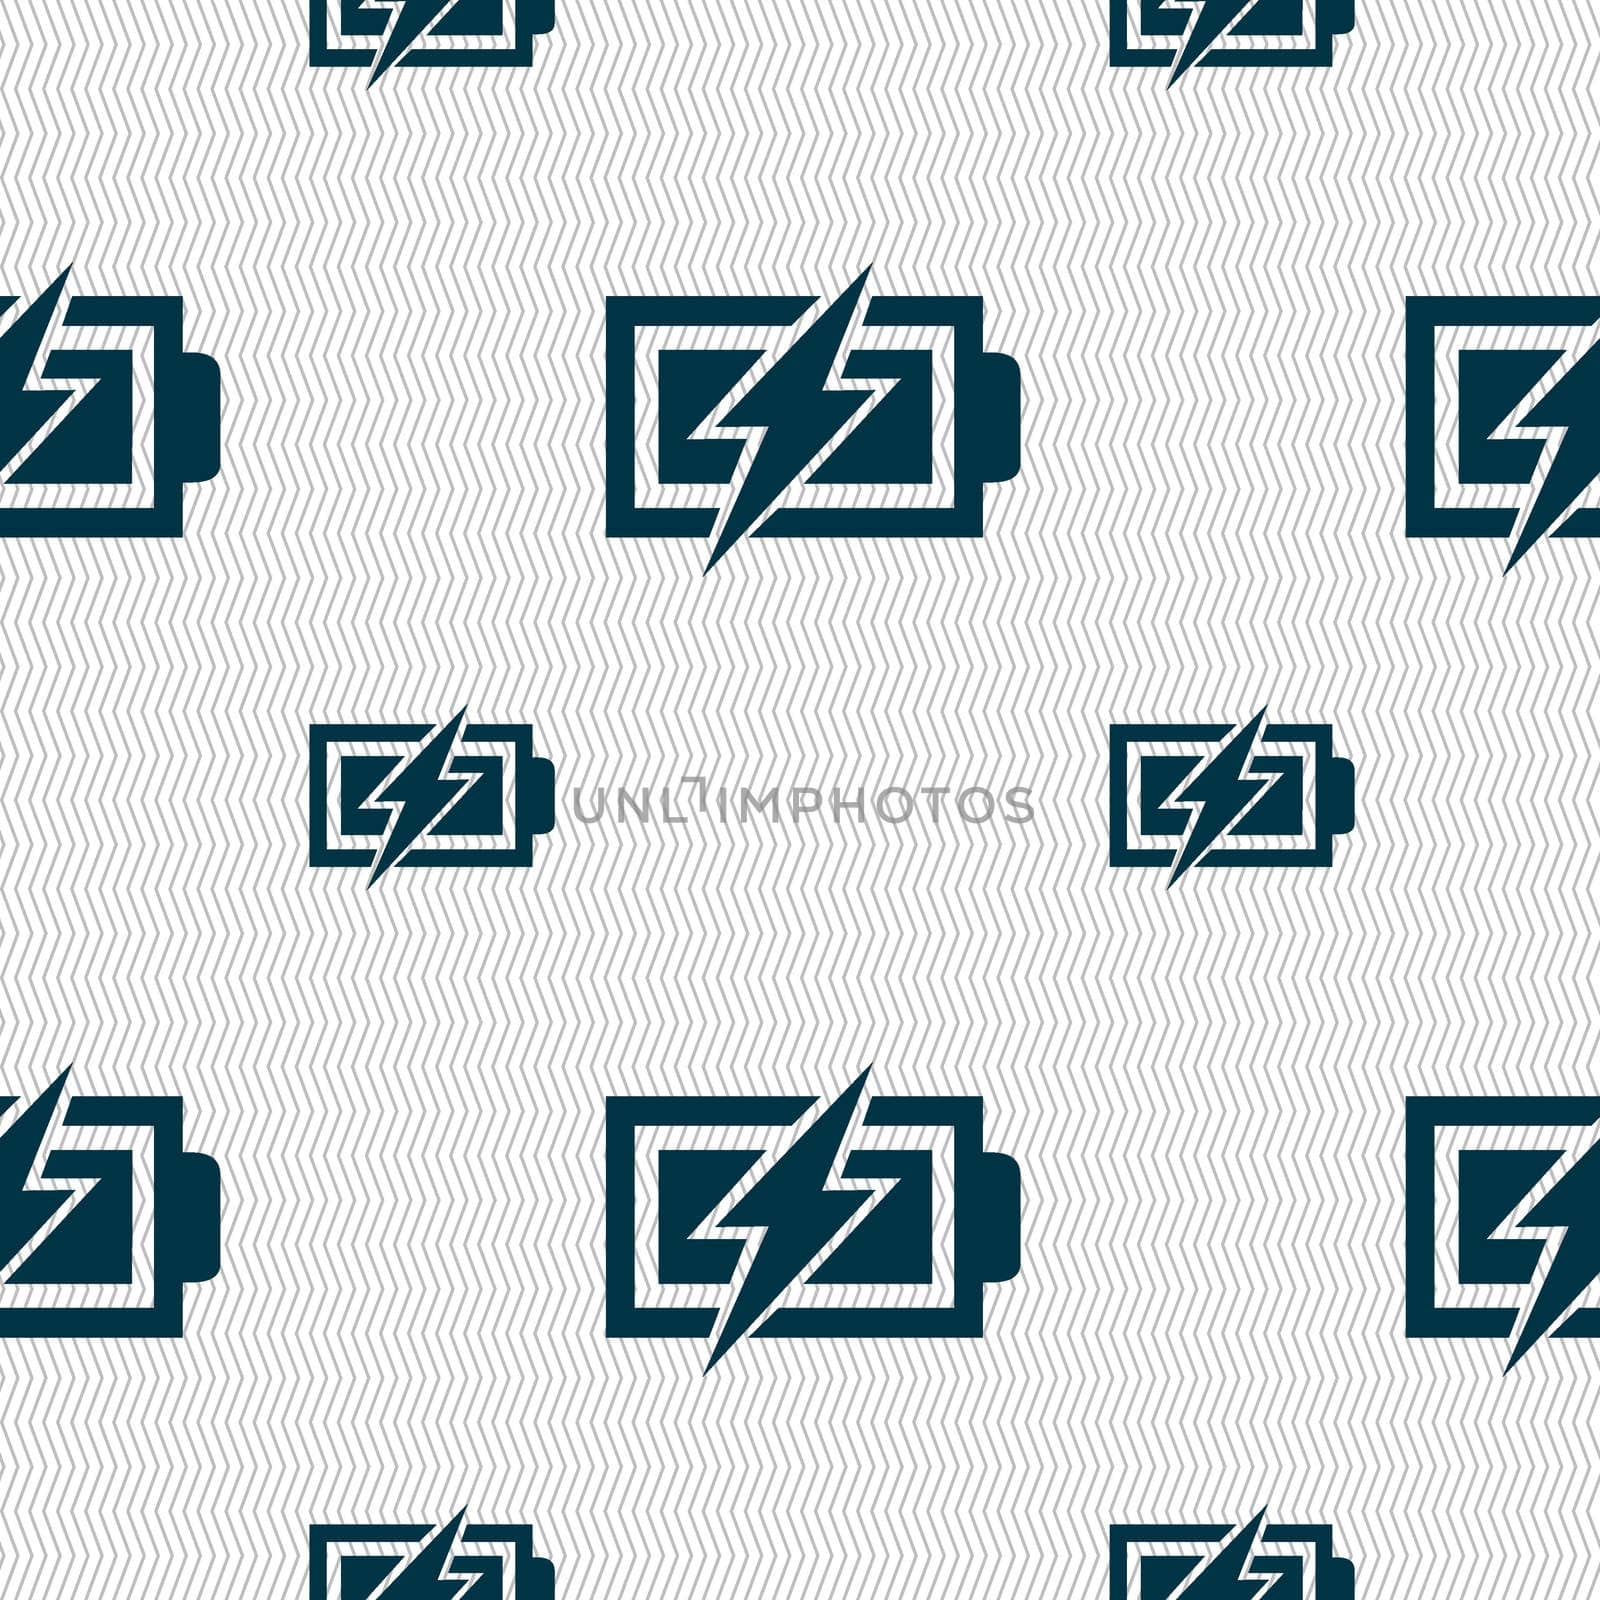 Battery charging sign icon. Lightning symbol. Seamless pattern with geometric texture. illustration